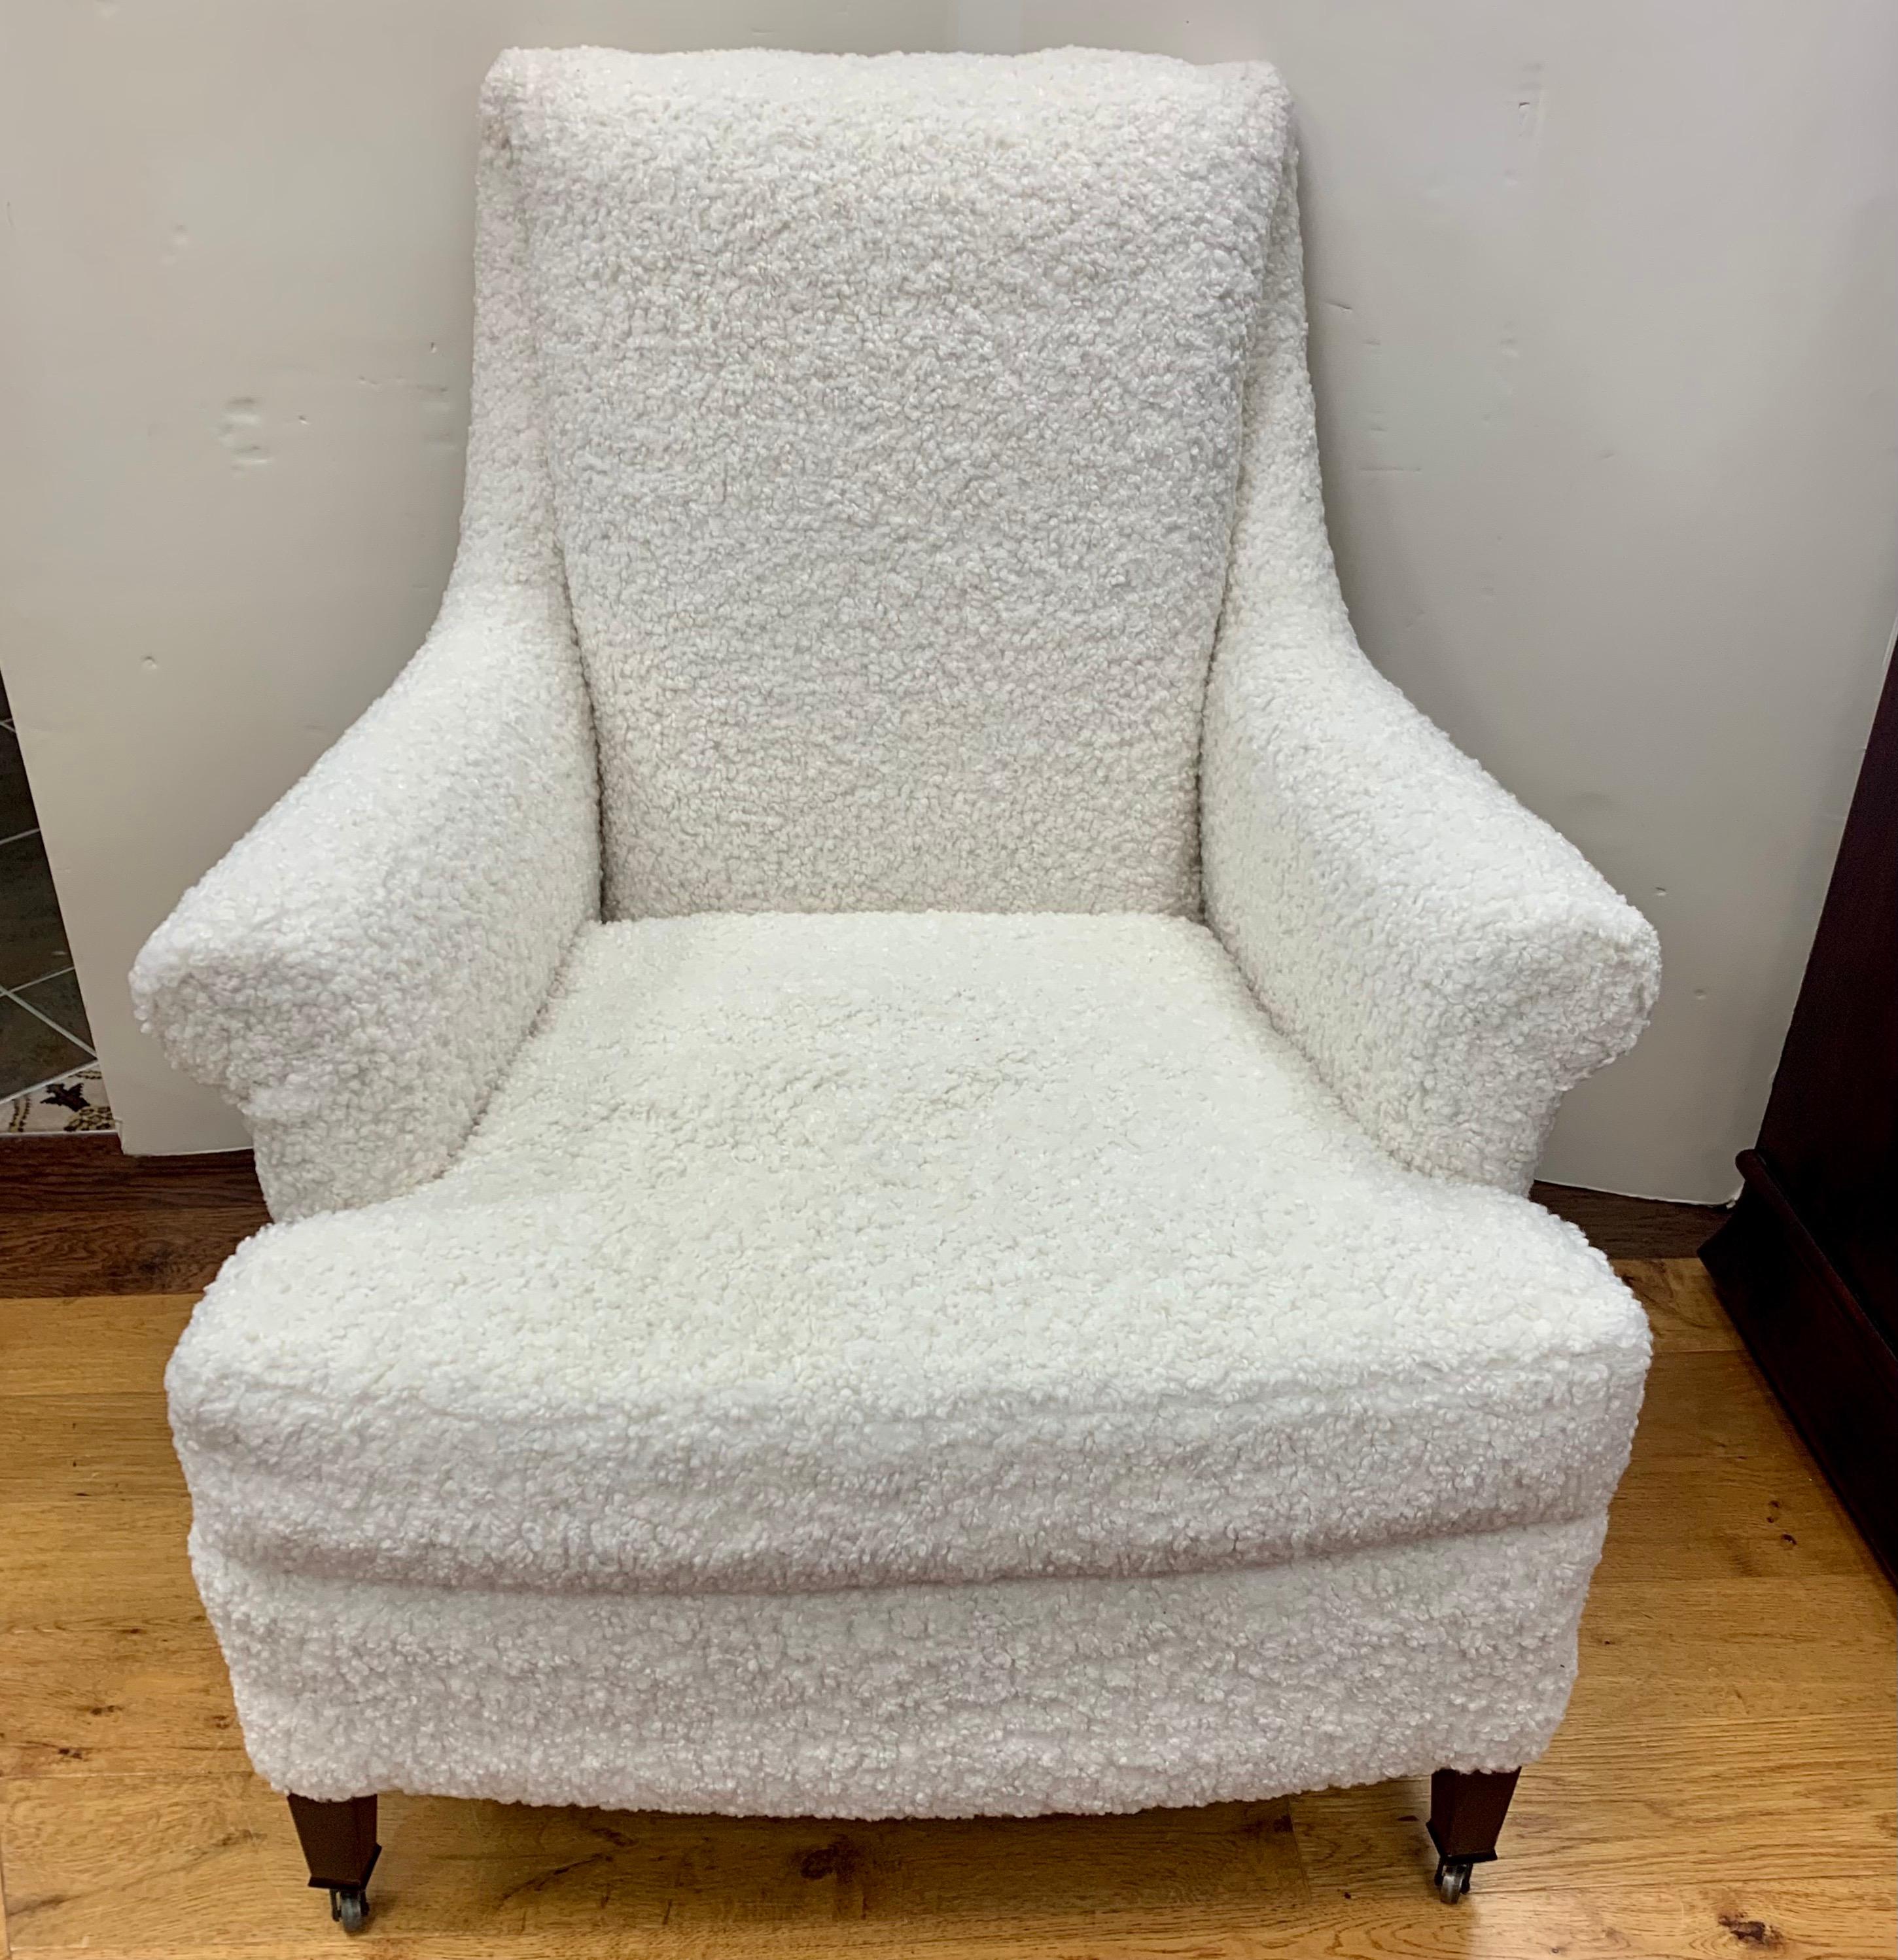 Stunning 1970's Mid-Century Modern lounge chair newly upholstered in a thick boucle fabric. Nothing short of stunning and so comfortable. Now, more than ever, home is where the heart is.